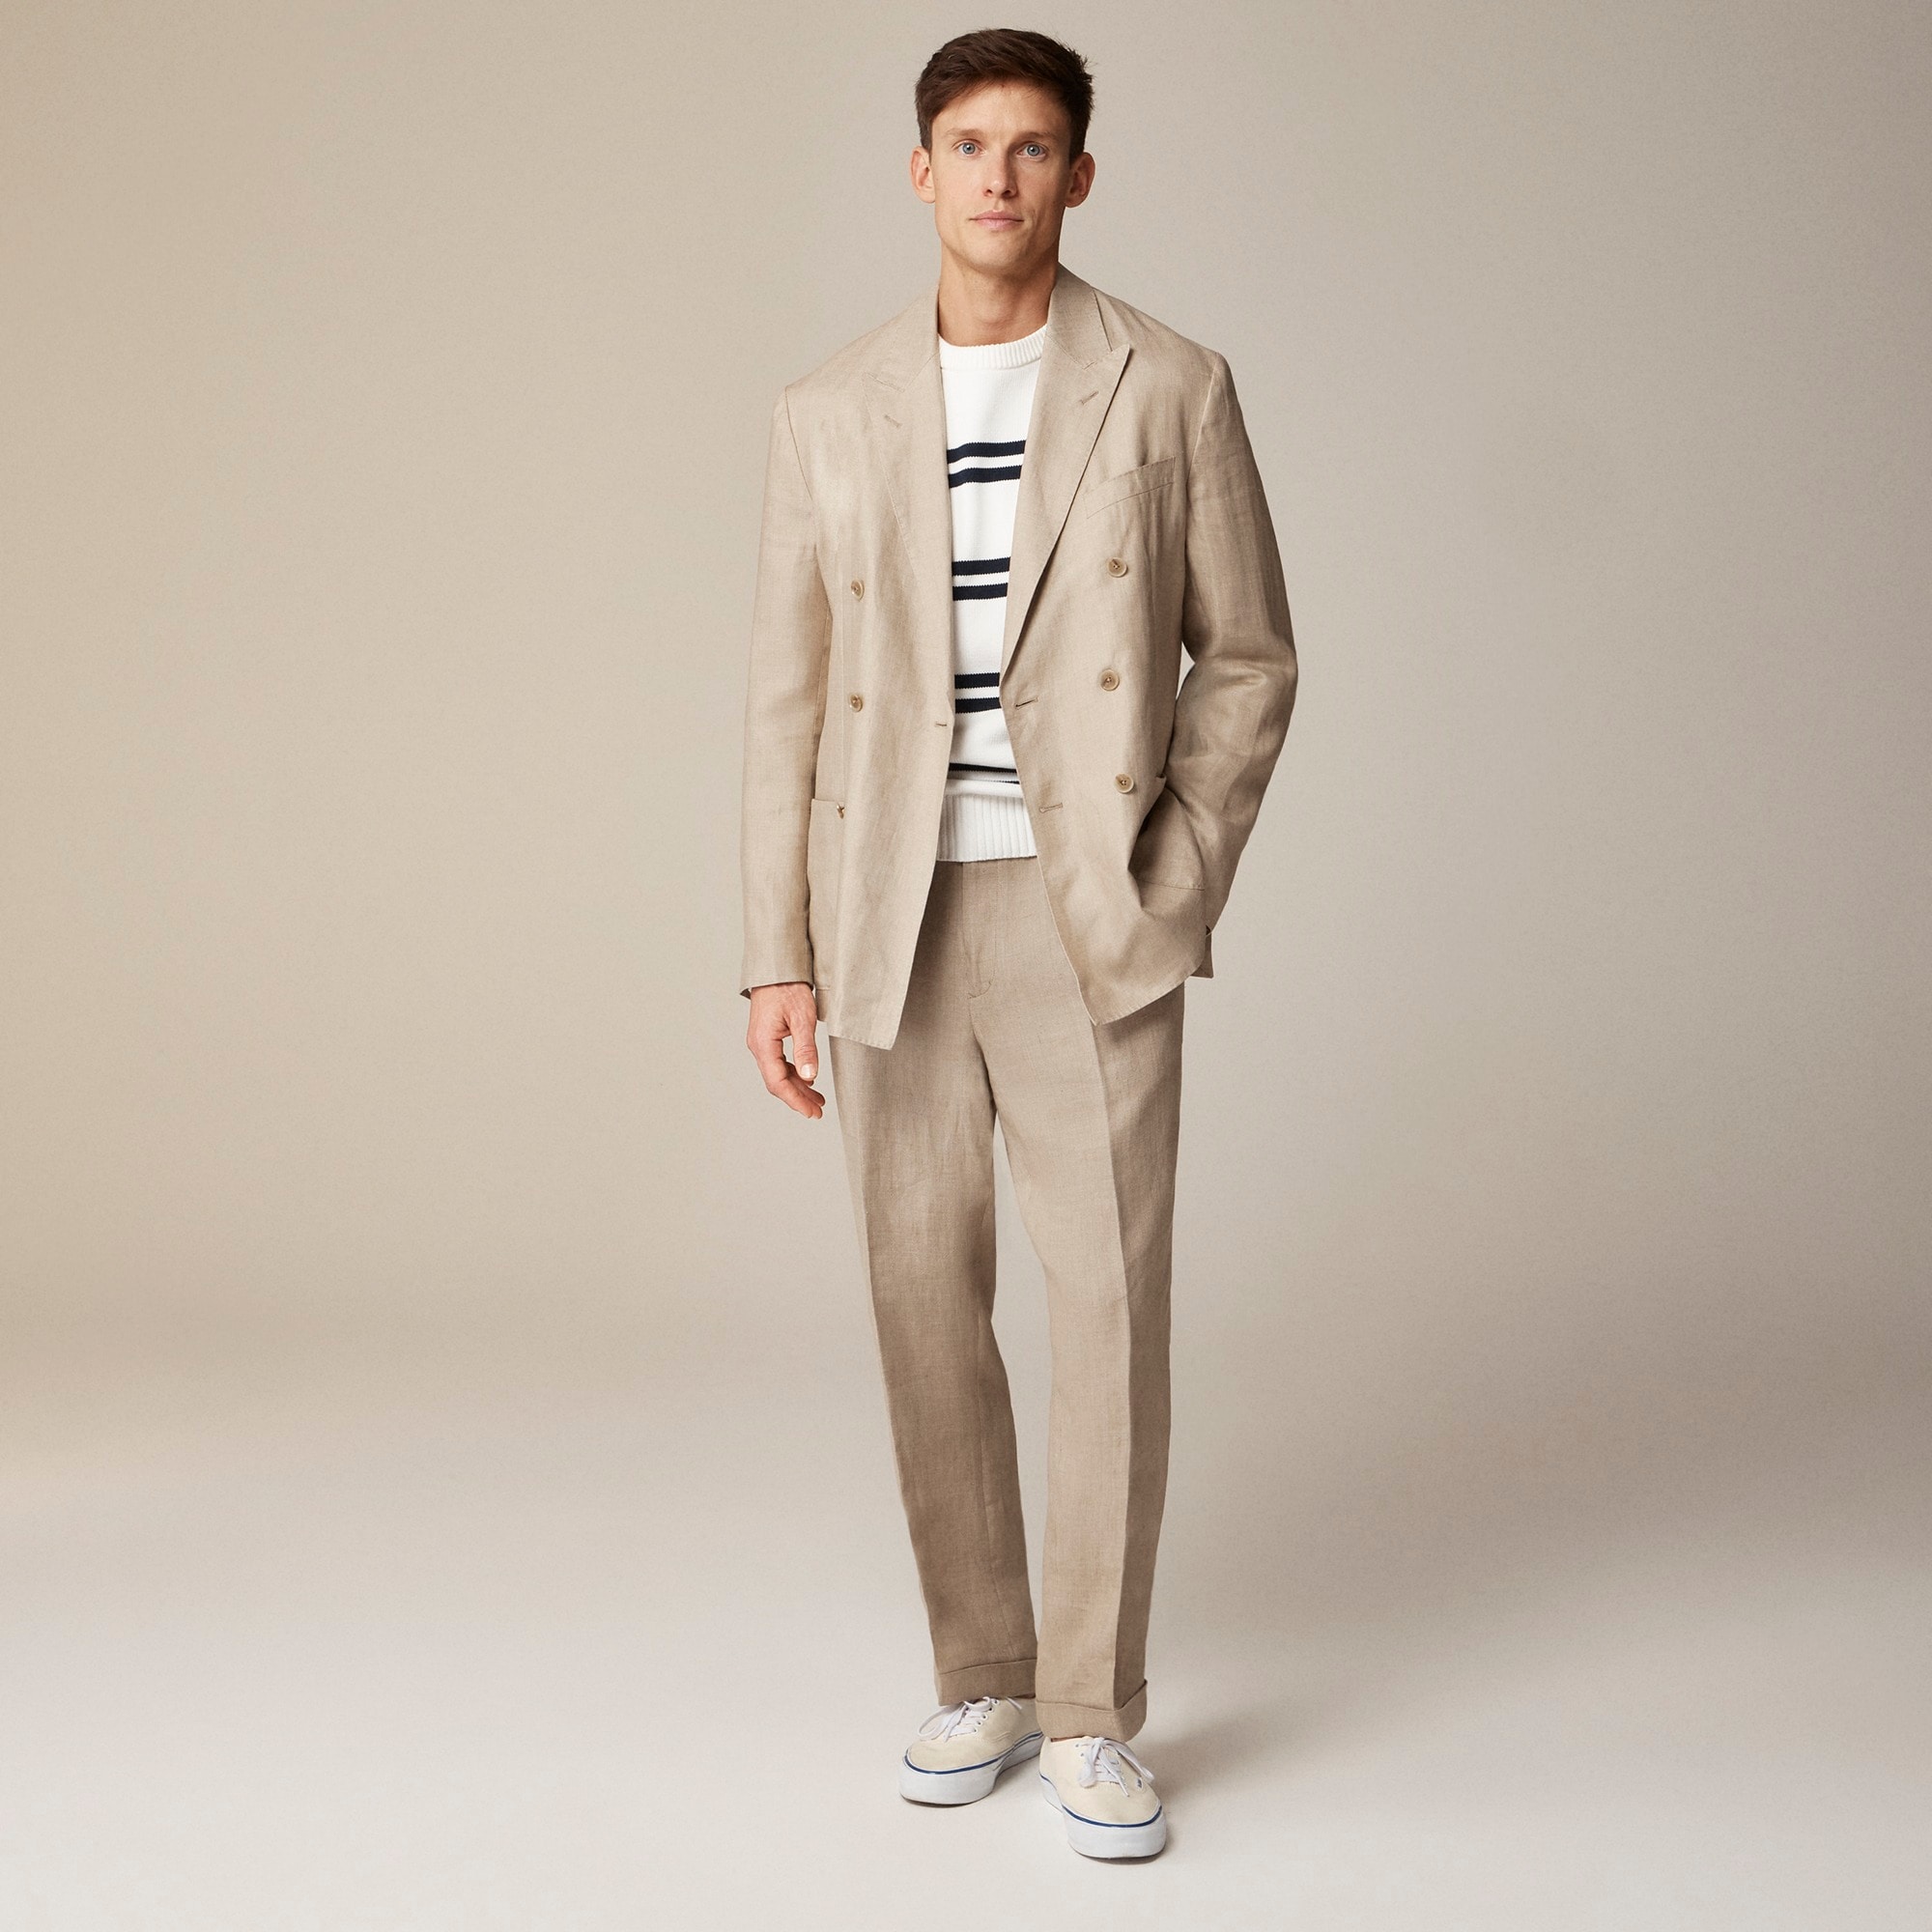  Crosby Classic-fit double-breasted unstructured suit jacket in linen blend